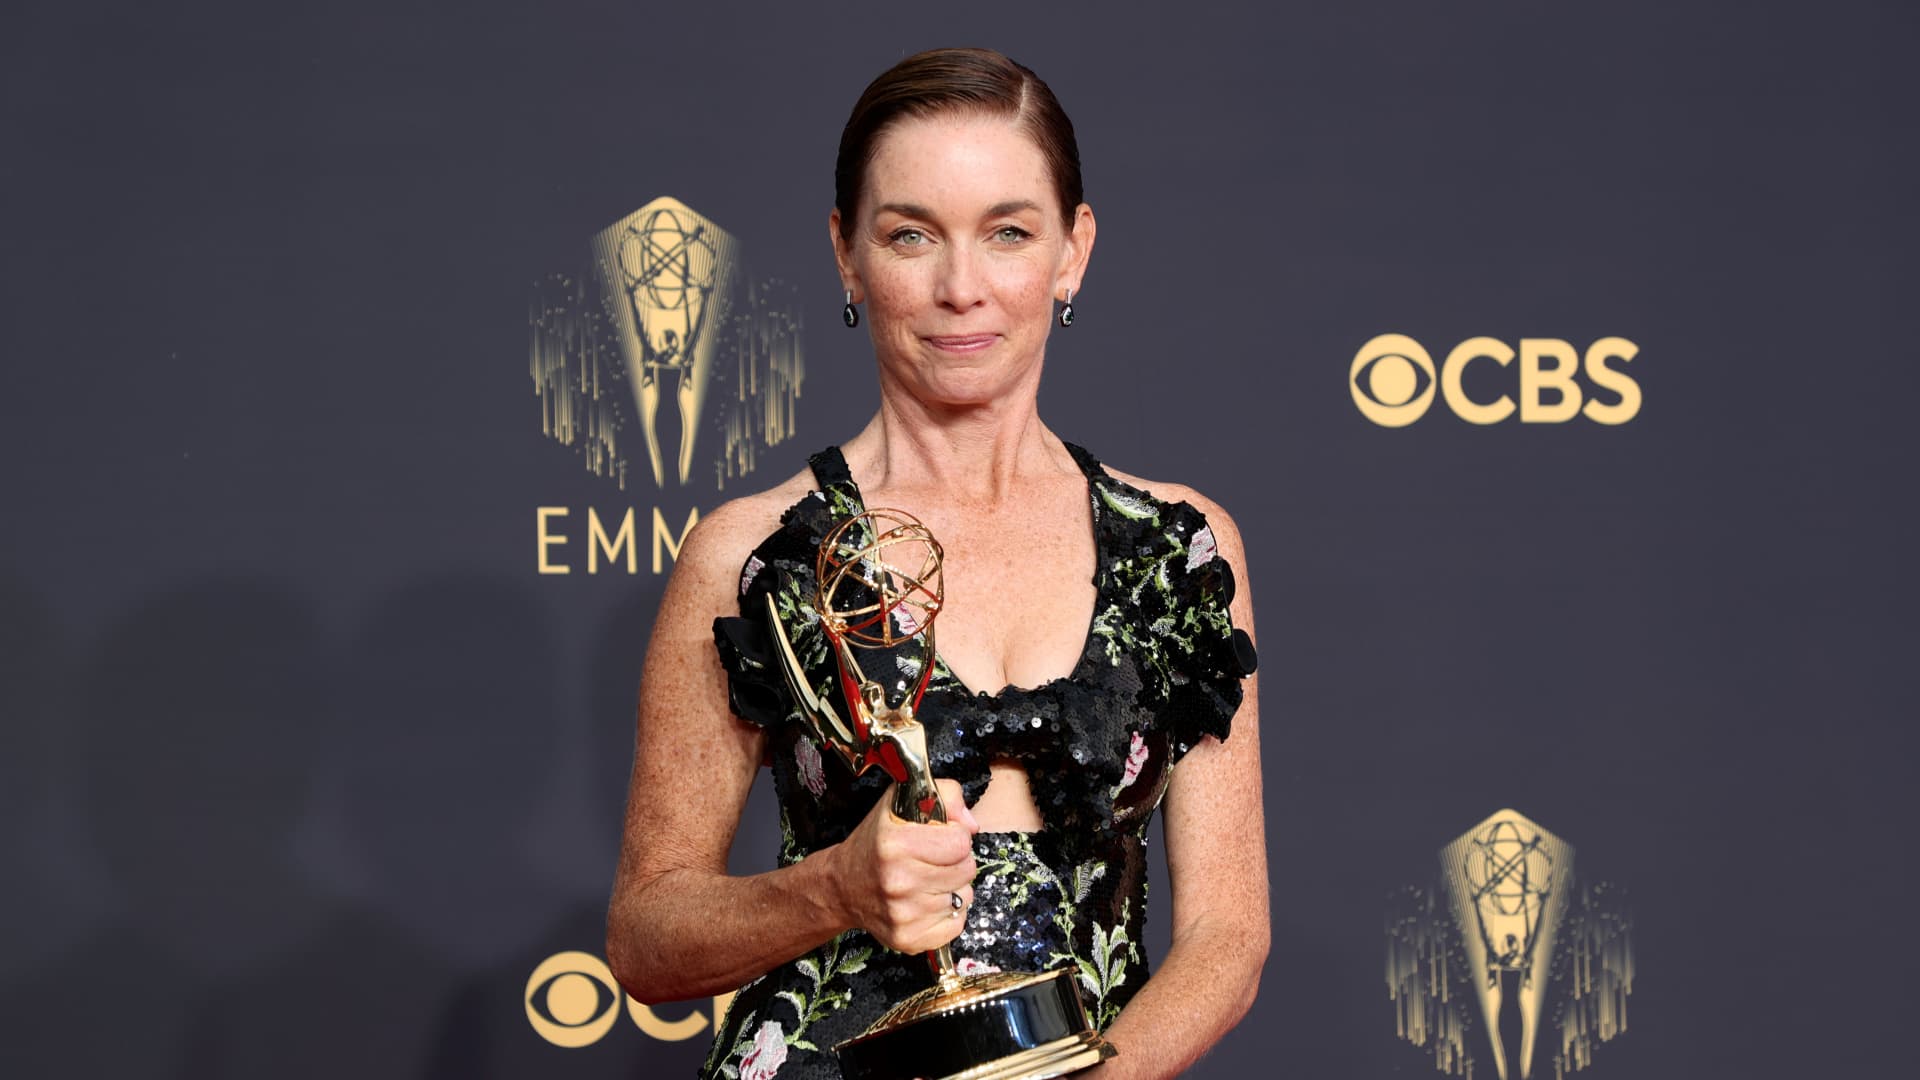 Julianne Nicholson, winner of the Outstanding Supporting Actress In A Limited Or Anthology Series Or Movie award for ‘Mare Of Easttown,’ poses in the press room during the 73rd Primetime Emmy Awards at L.A. LIVE on September 19, 2021 in Los Angeles, California.